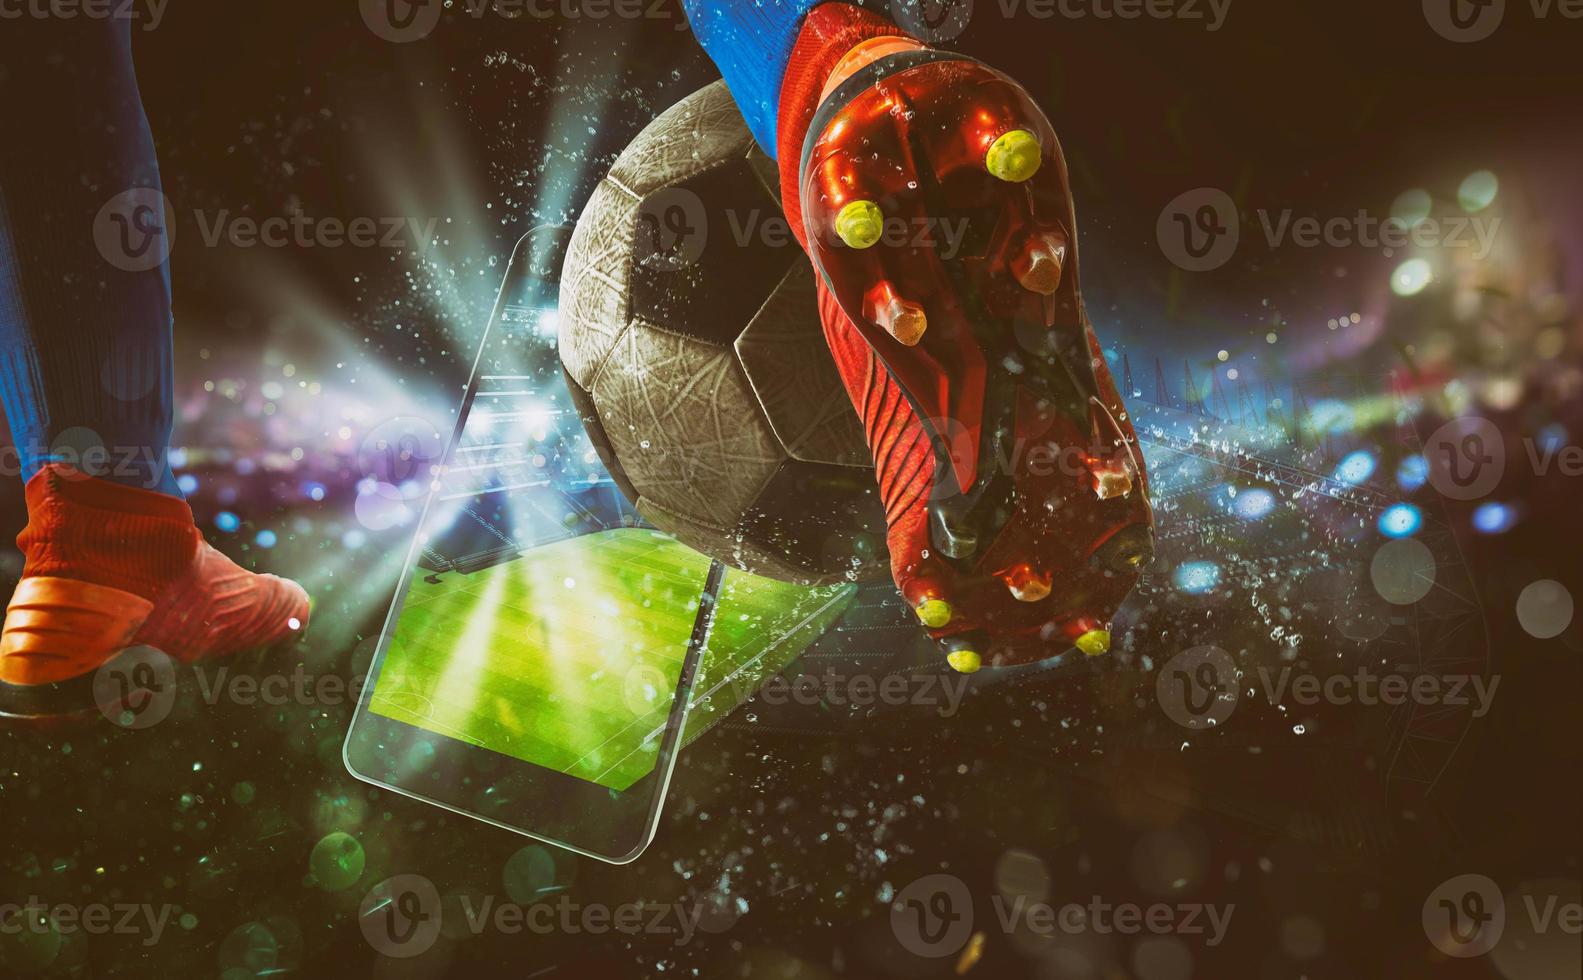 Watch a live sports event on your mobile device. Betting on football matches photo